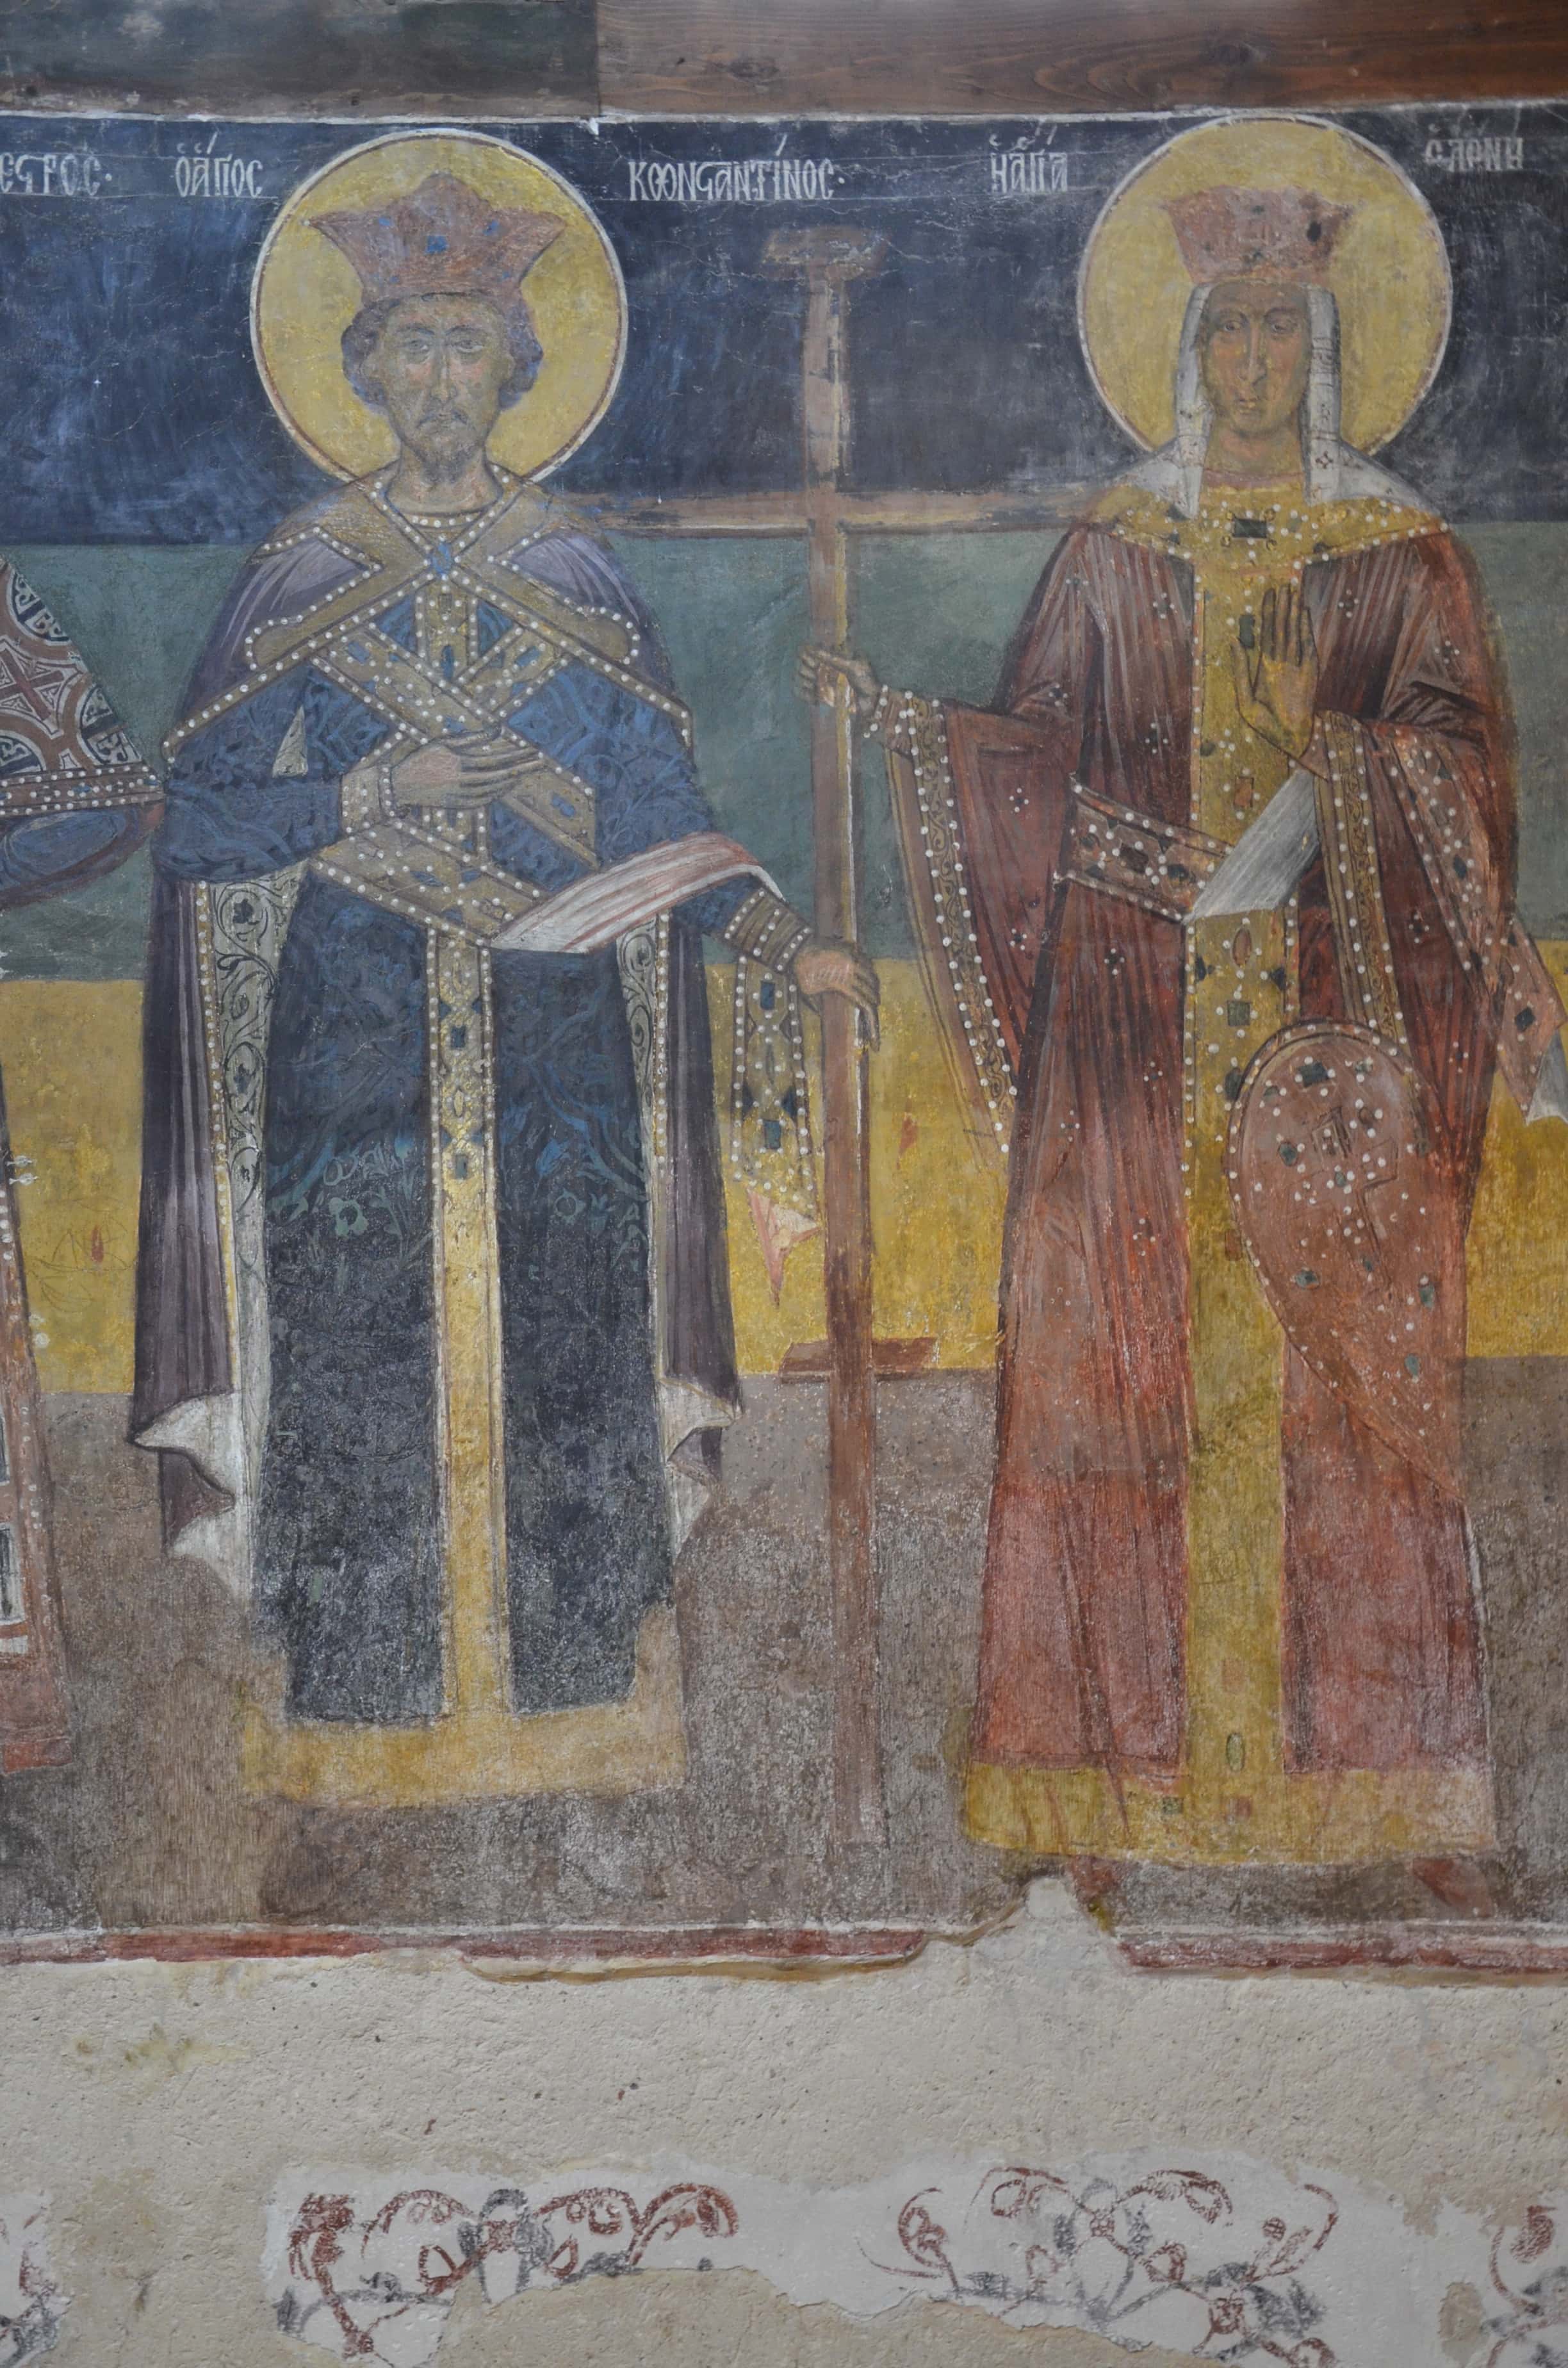 Saints Constantine and Helen in the nave at the Church of Saint Stephen in Nessebar, Bulgaria